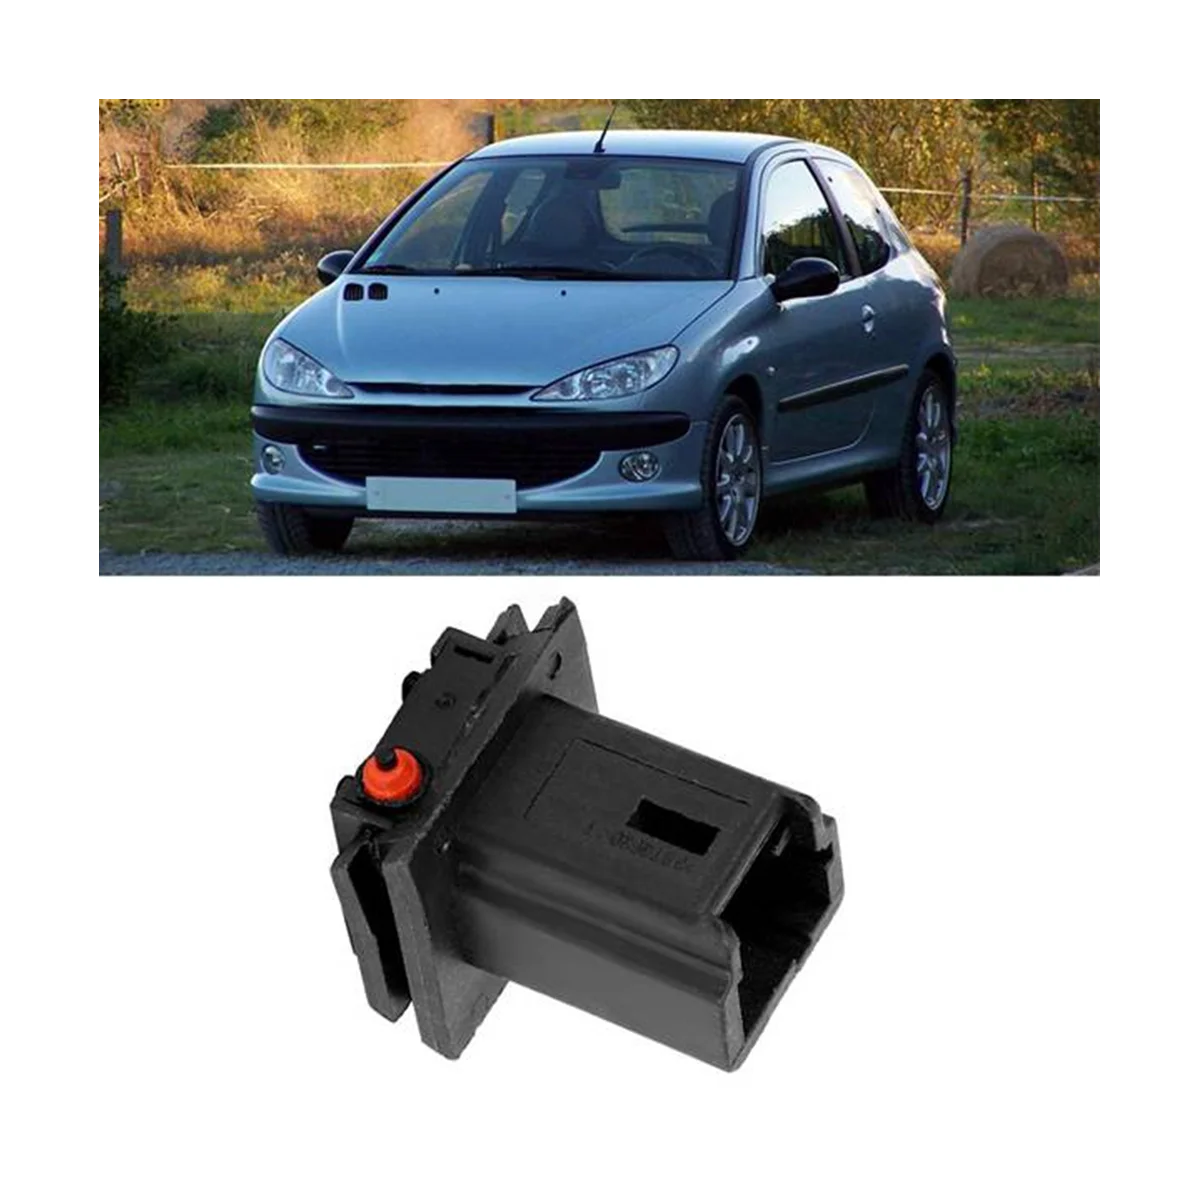 

2 Pcs Trunk Switch Boot Release Switch Rear Door Handle Button for Citroen C4 for Peugeot 307 308 408 301 6554V5